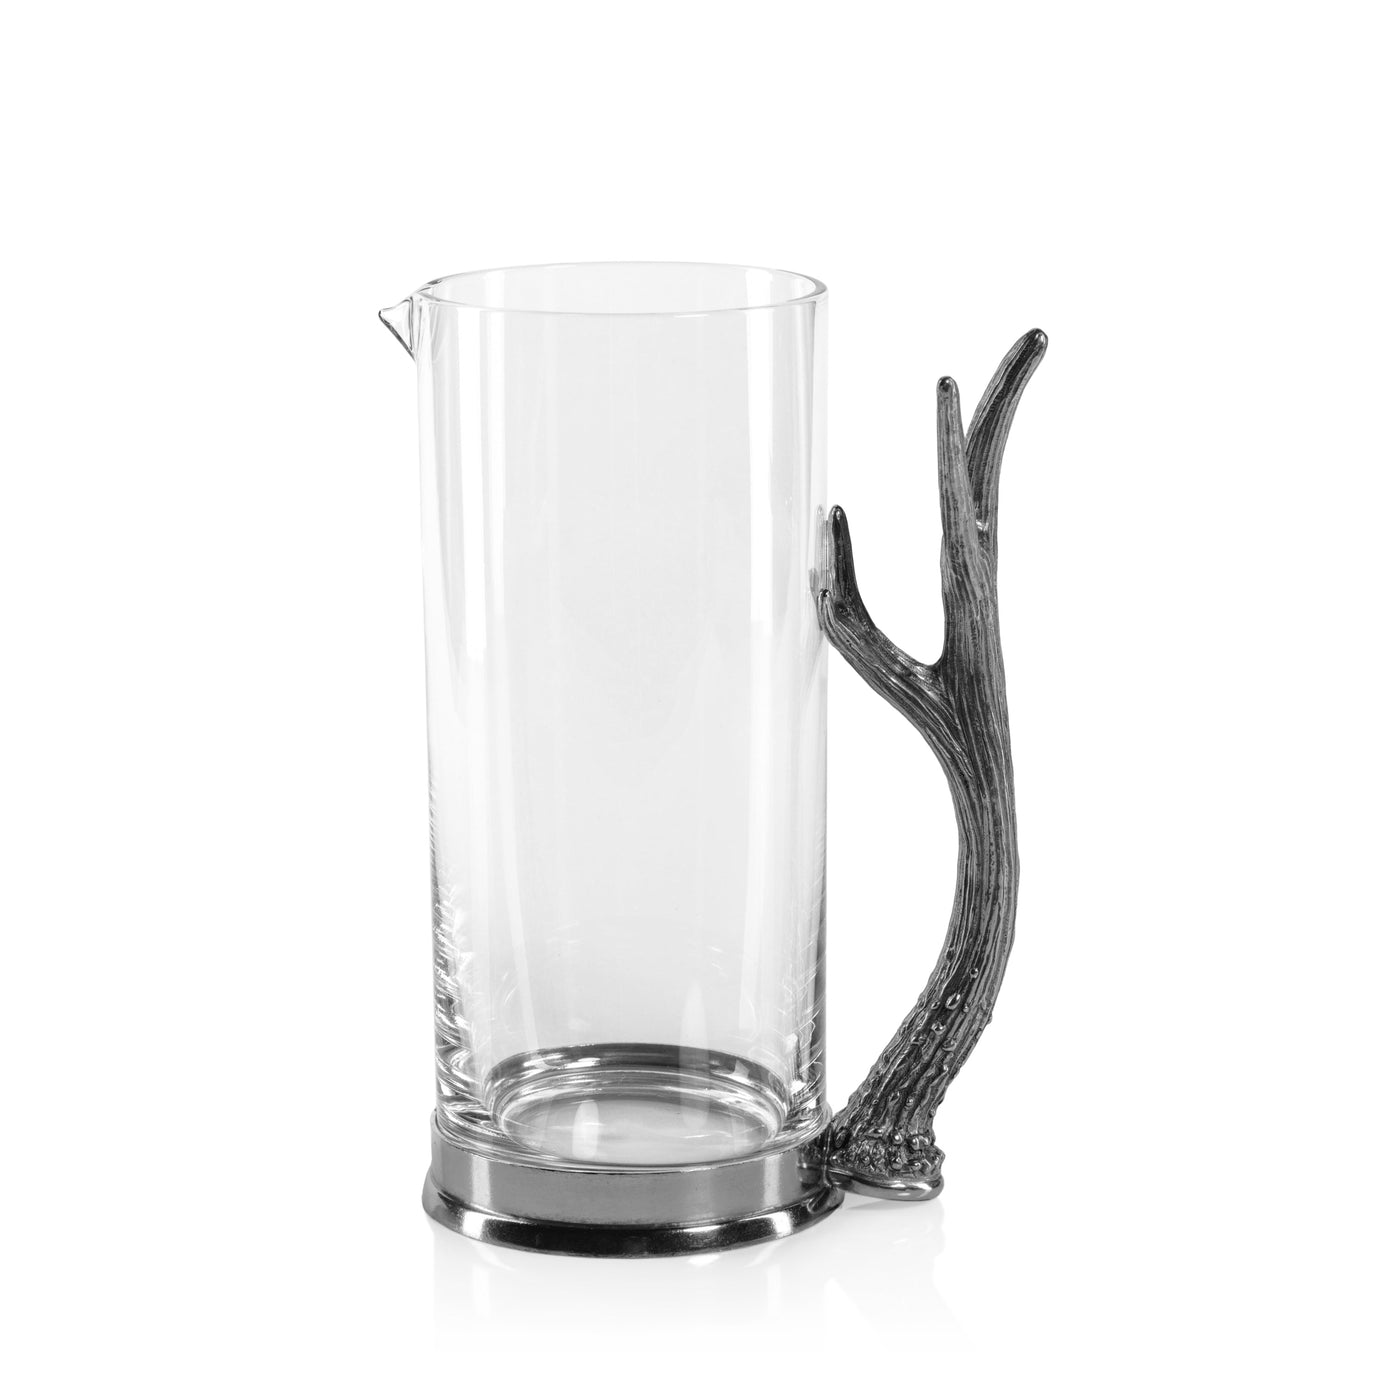 Davos Rock Glass Pitcher w/ Pewter Antler Handle-Home/Giftware-Kevin's Fine Outdoor Gear & Apparel